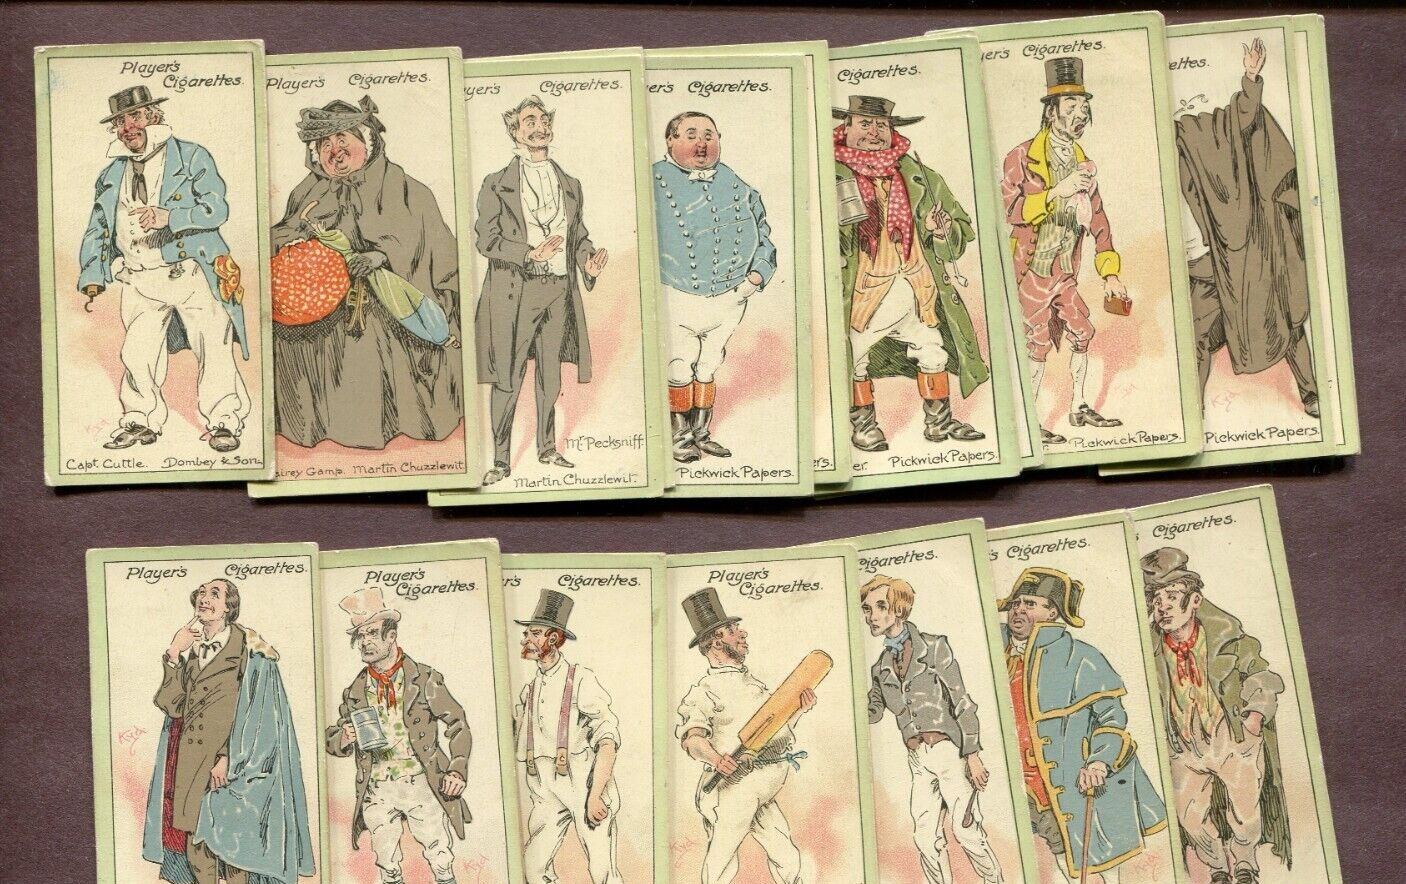 1912 JOHN PLAYER CIGARETTES SERIES 1 CHARACTERS FROM DICKENS 25 CARD SET